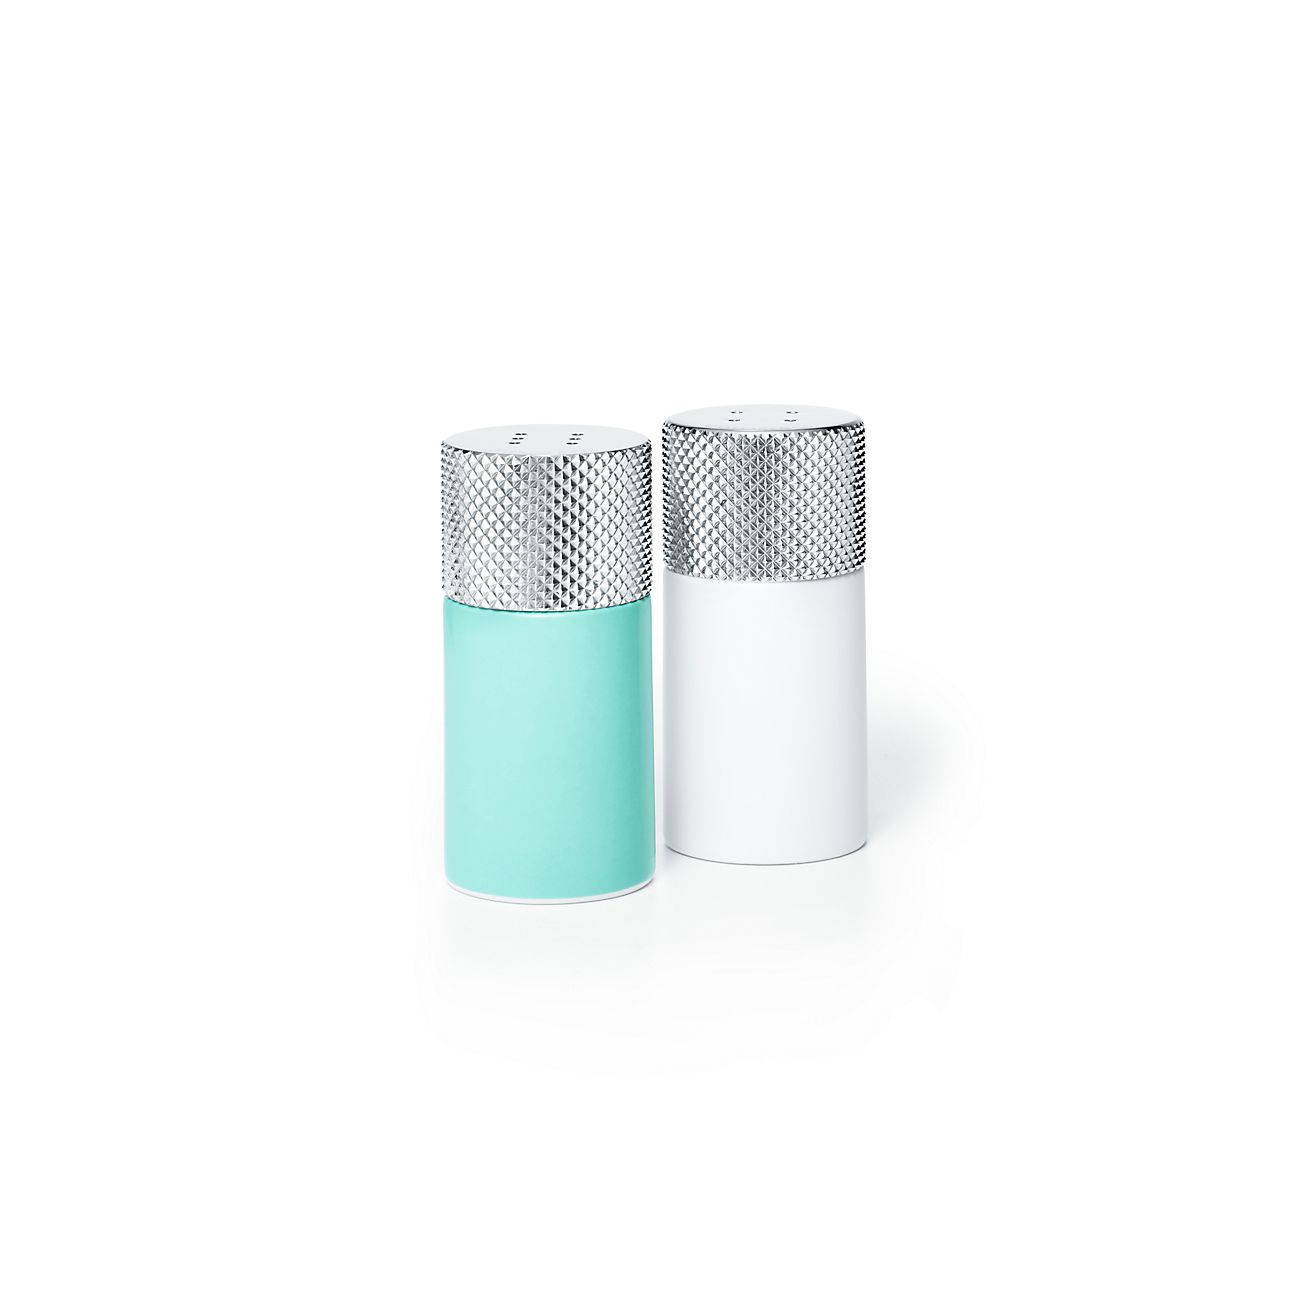 tiffany and co salt and pepper shaker